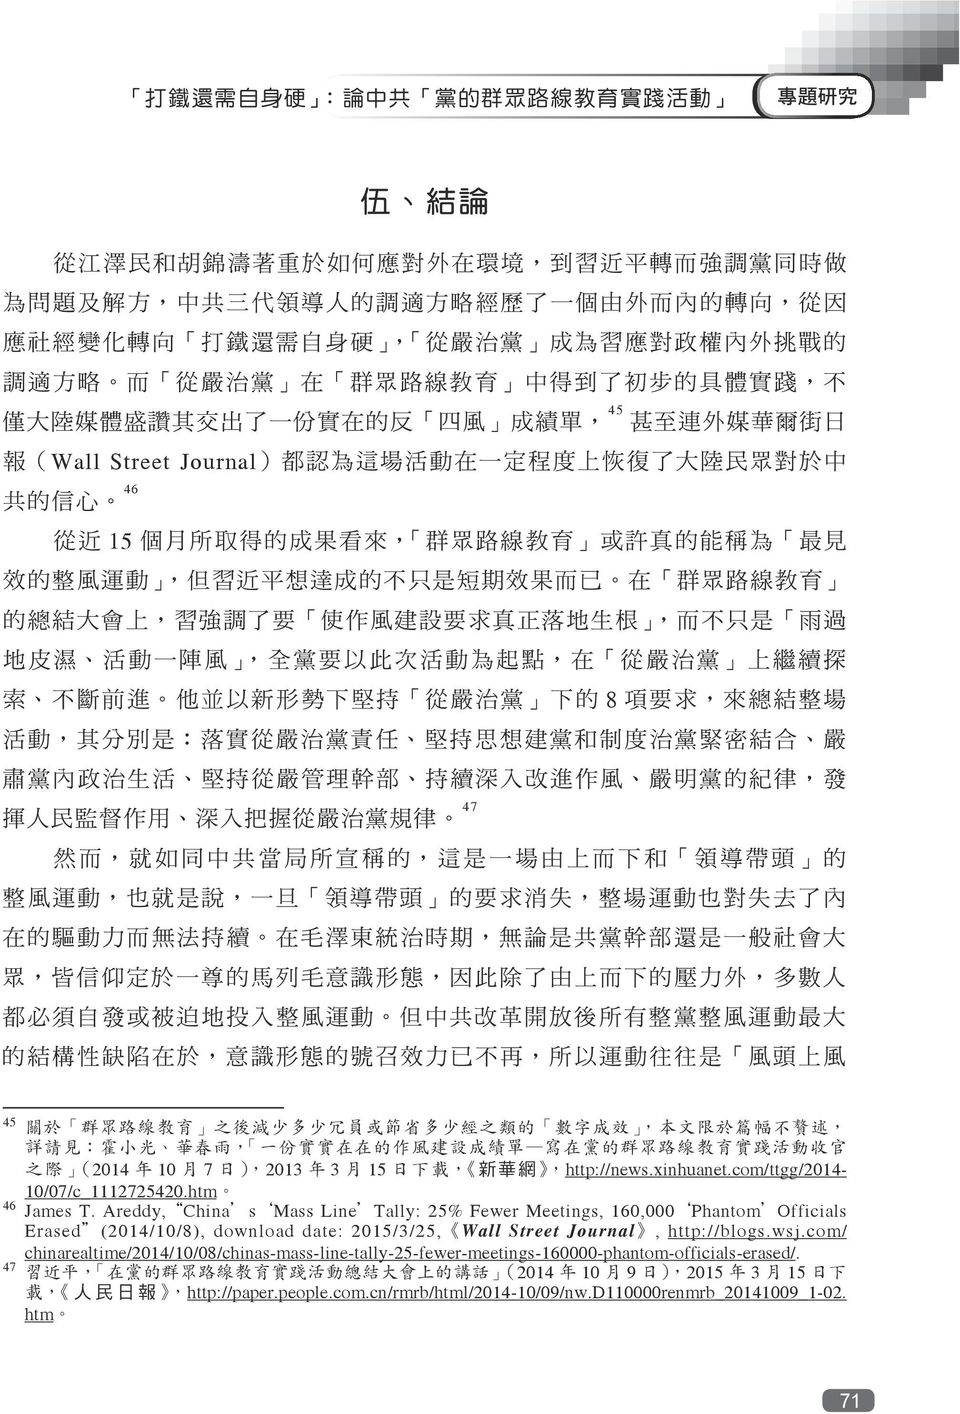 Areddy, China s Mass Line Tally: 25% Fewer Meetings, 160,000 Phantom Officials Erased (2014/10/8), download date: 2015/3/25, Wall Street